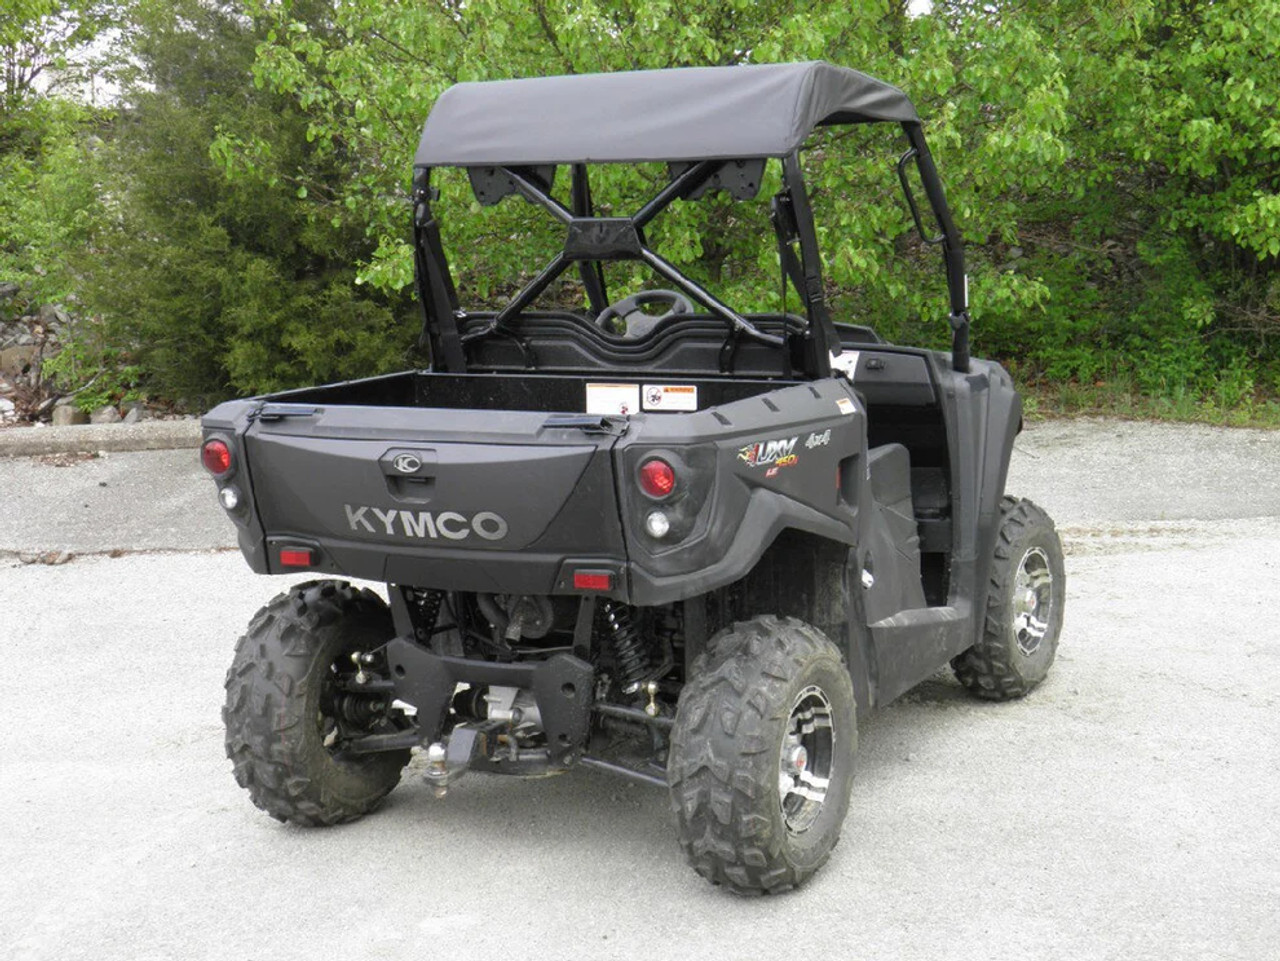 Kymco UXV 450i Soft Top rear view